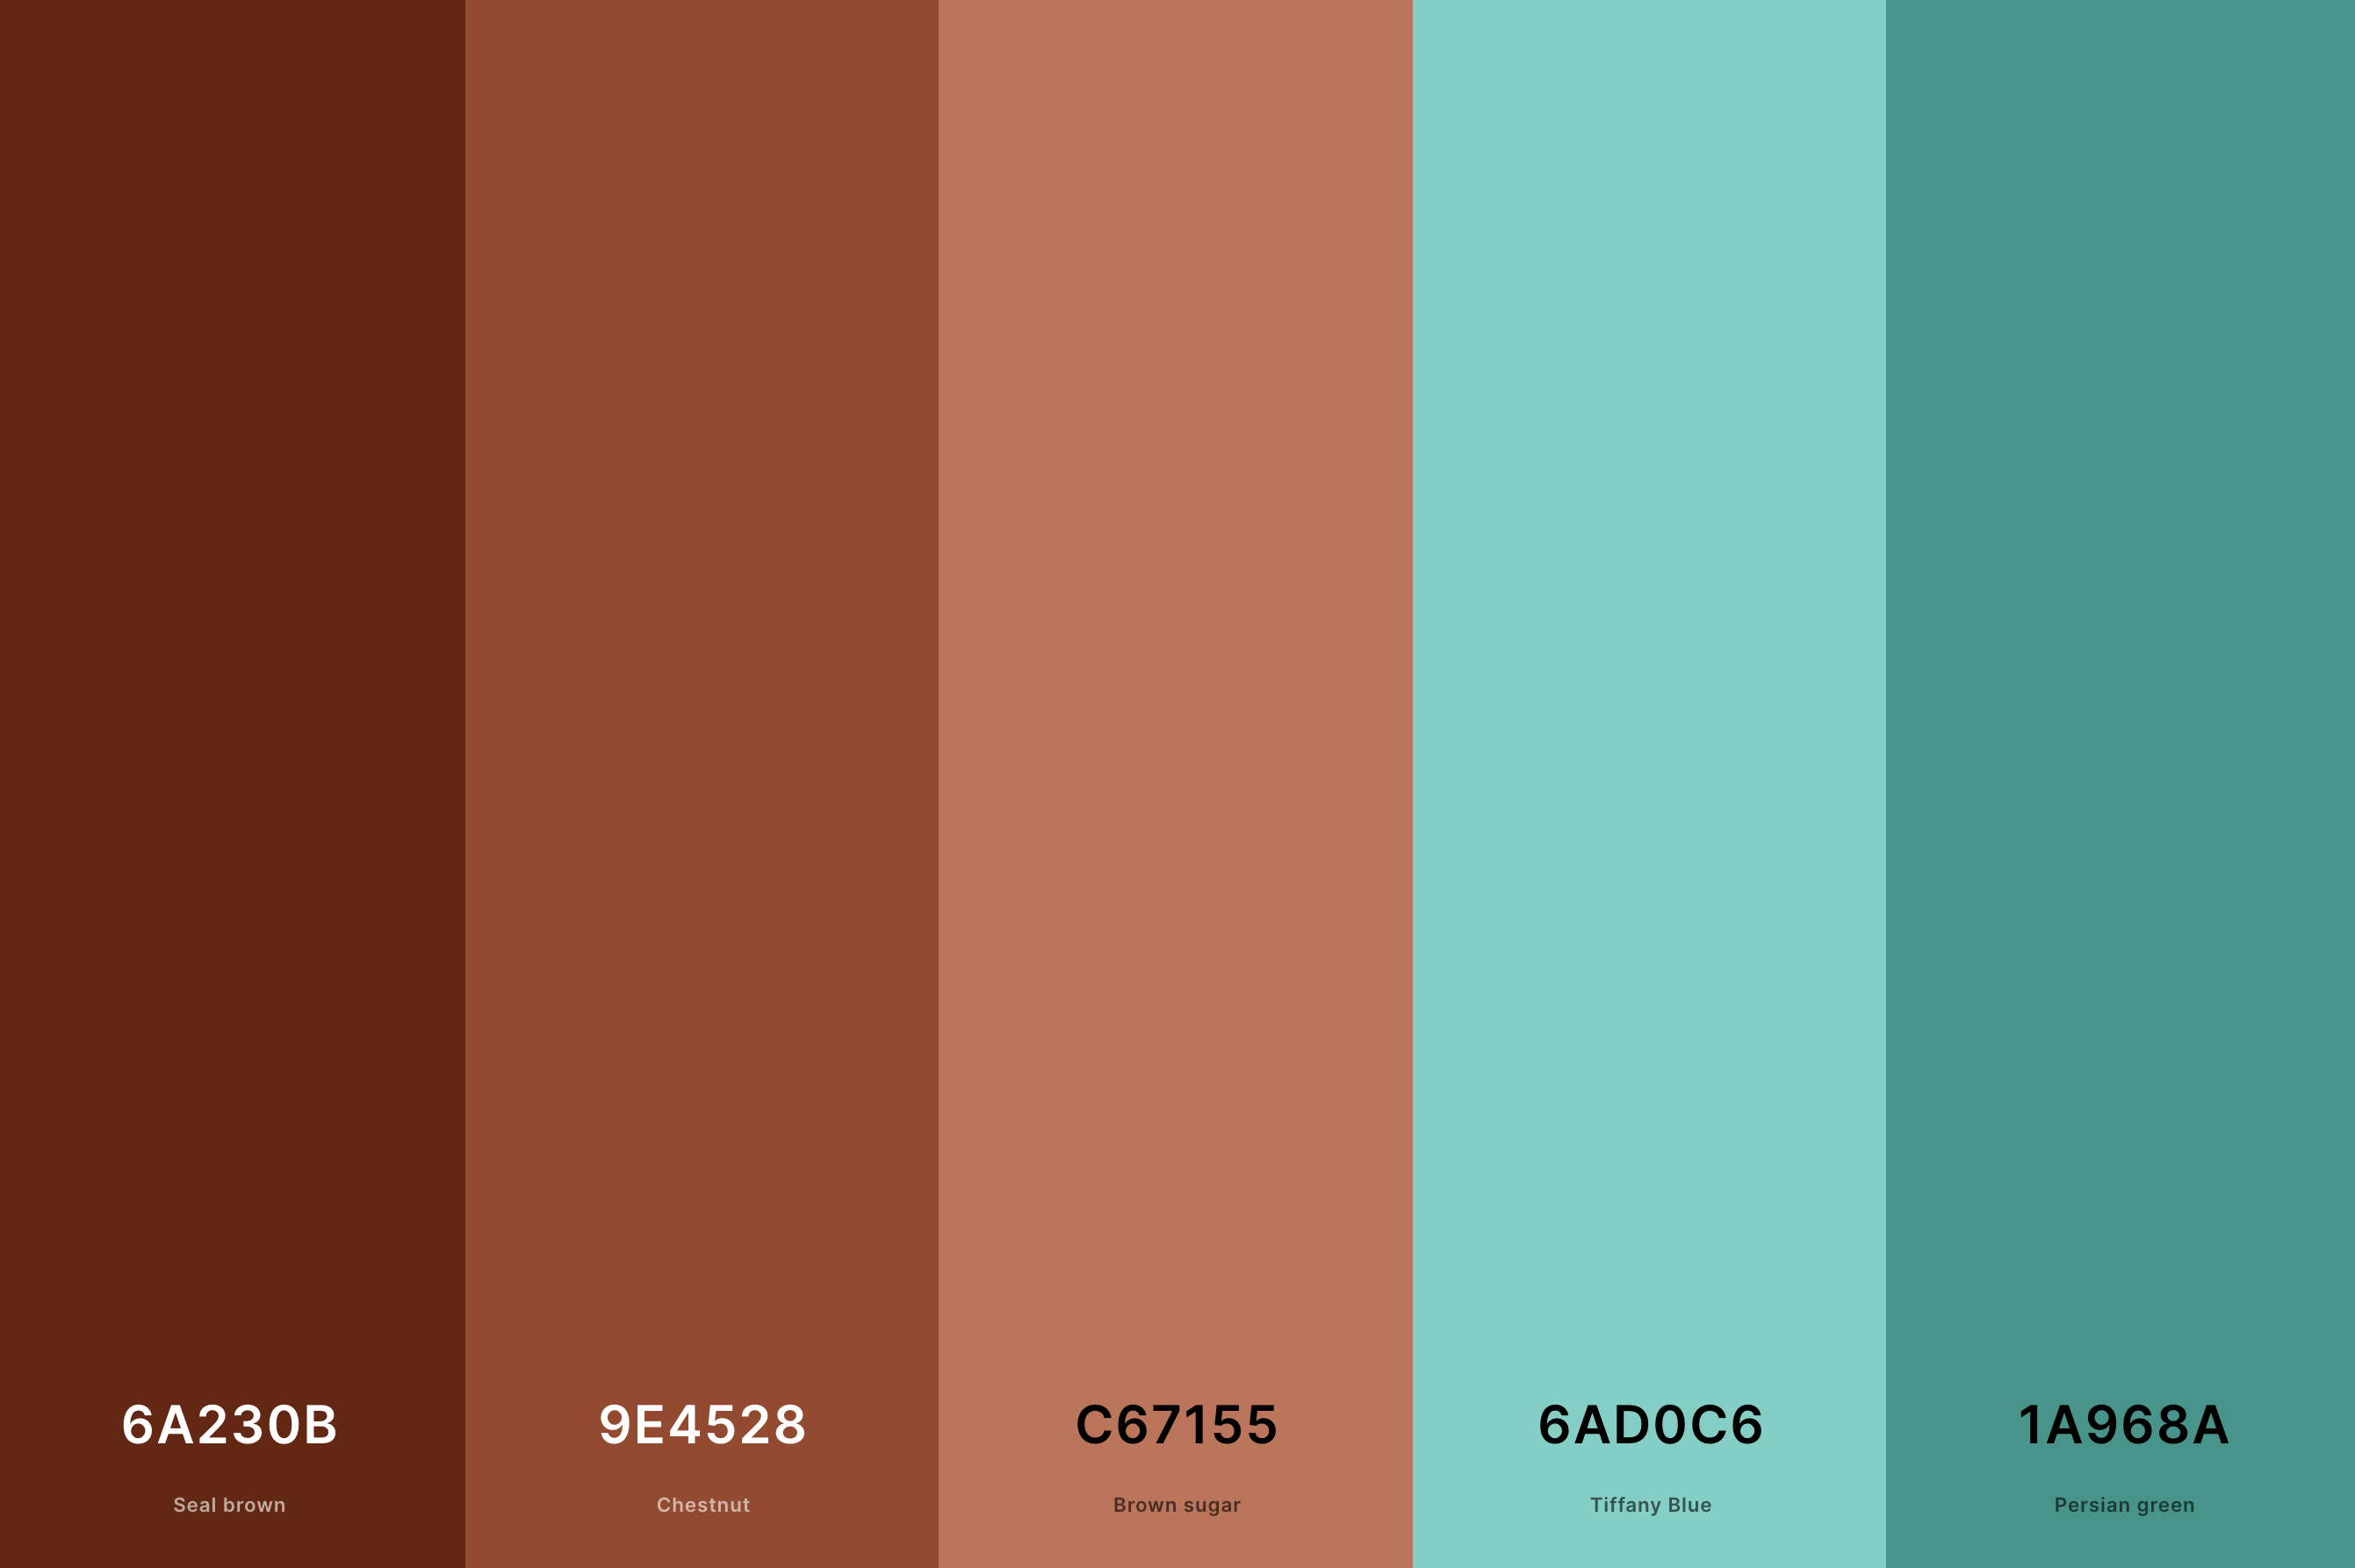 27. Turquoise And Terracotta Color Palette Color Palette with Seal Brown (Hex #6A230B) + Chestnut (Hex #9E4528) + Brown Sugar (Hex #C67155) + Tiffany Blue (Hex #6AD0C6) + Persian Green (Hex #1A968A) Color Palette with Hex Codes